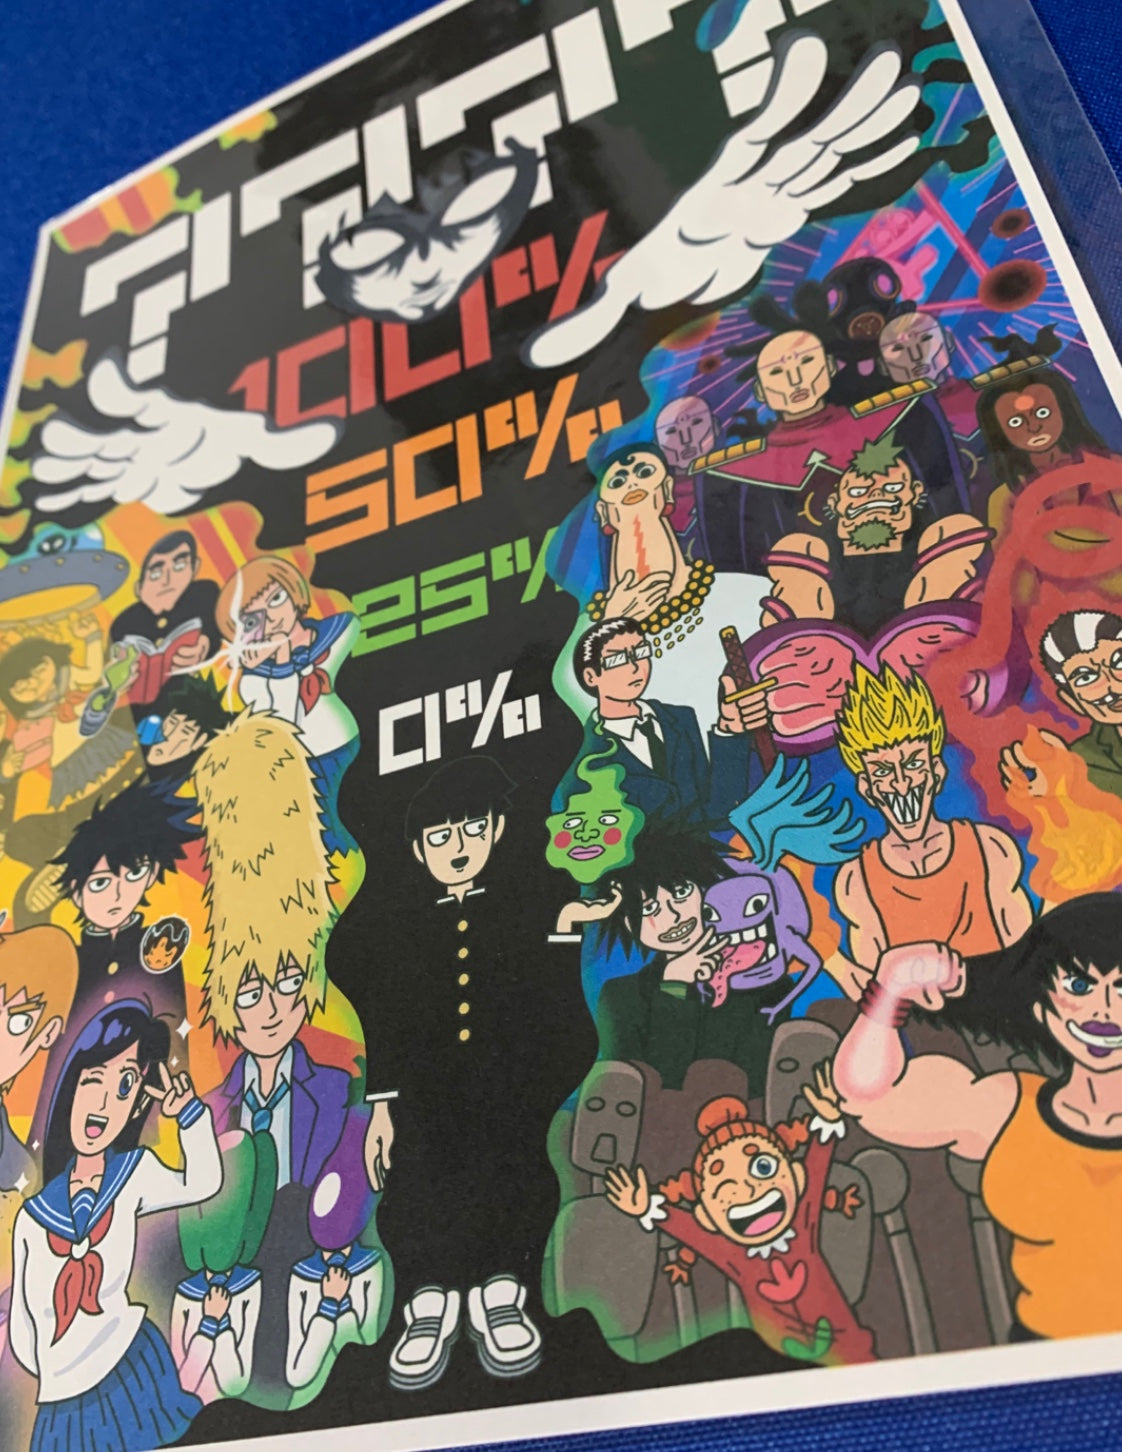 "Mob Psycho" by CrystalFace